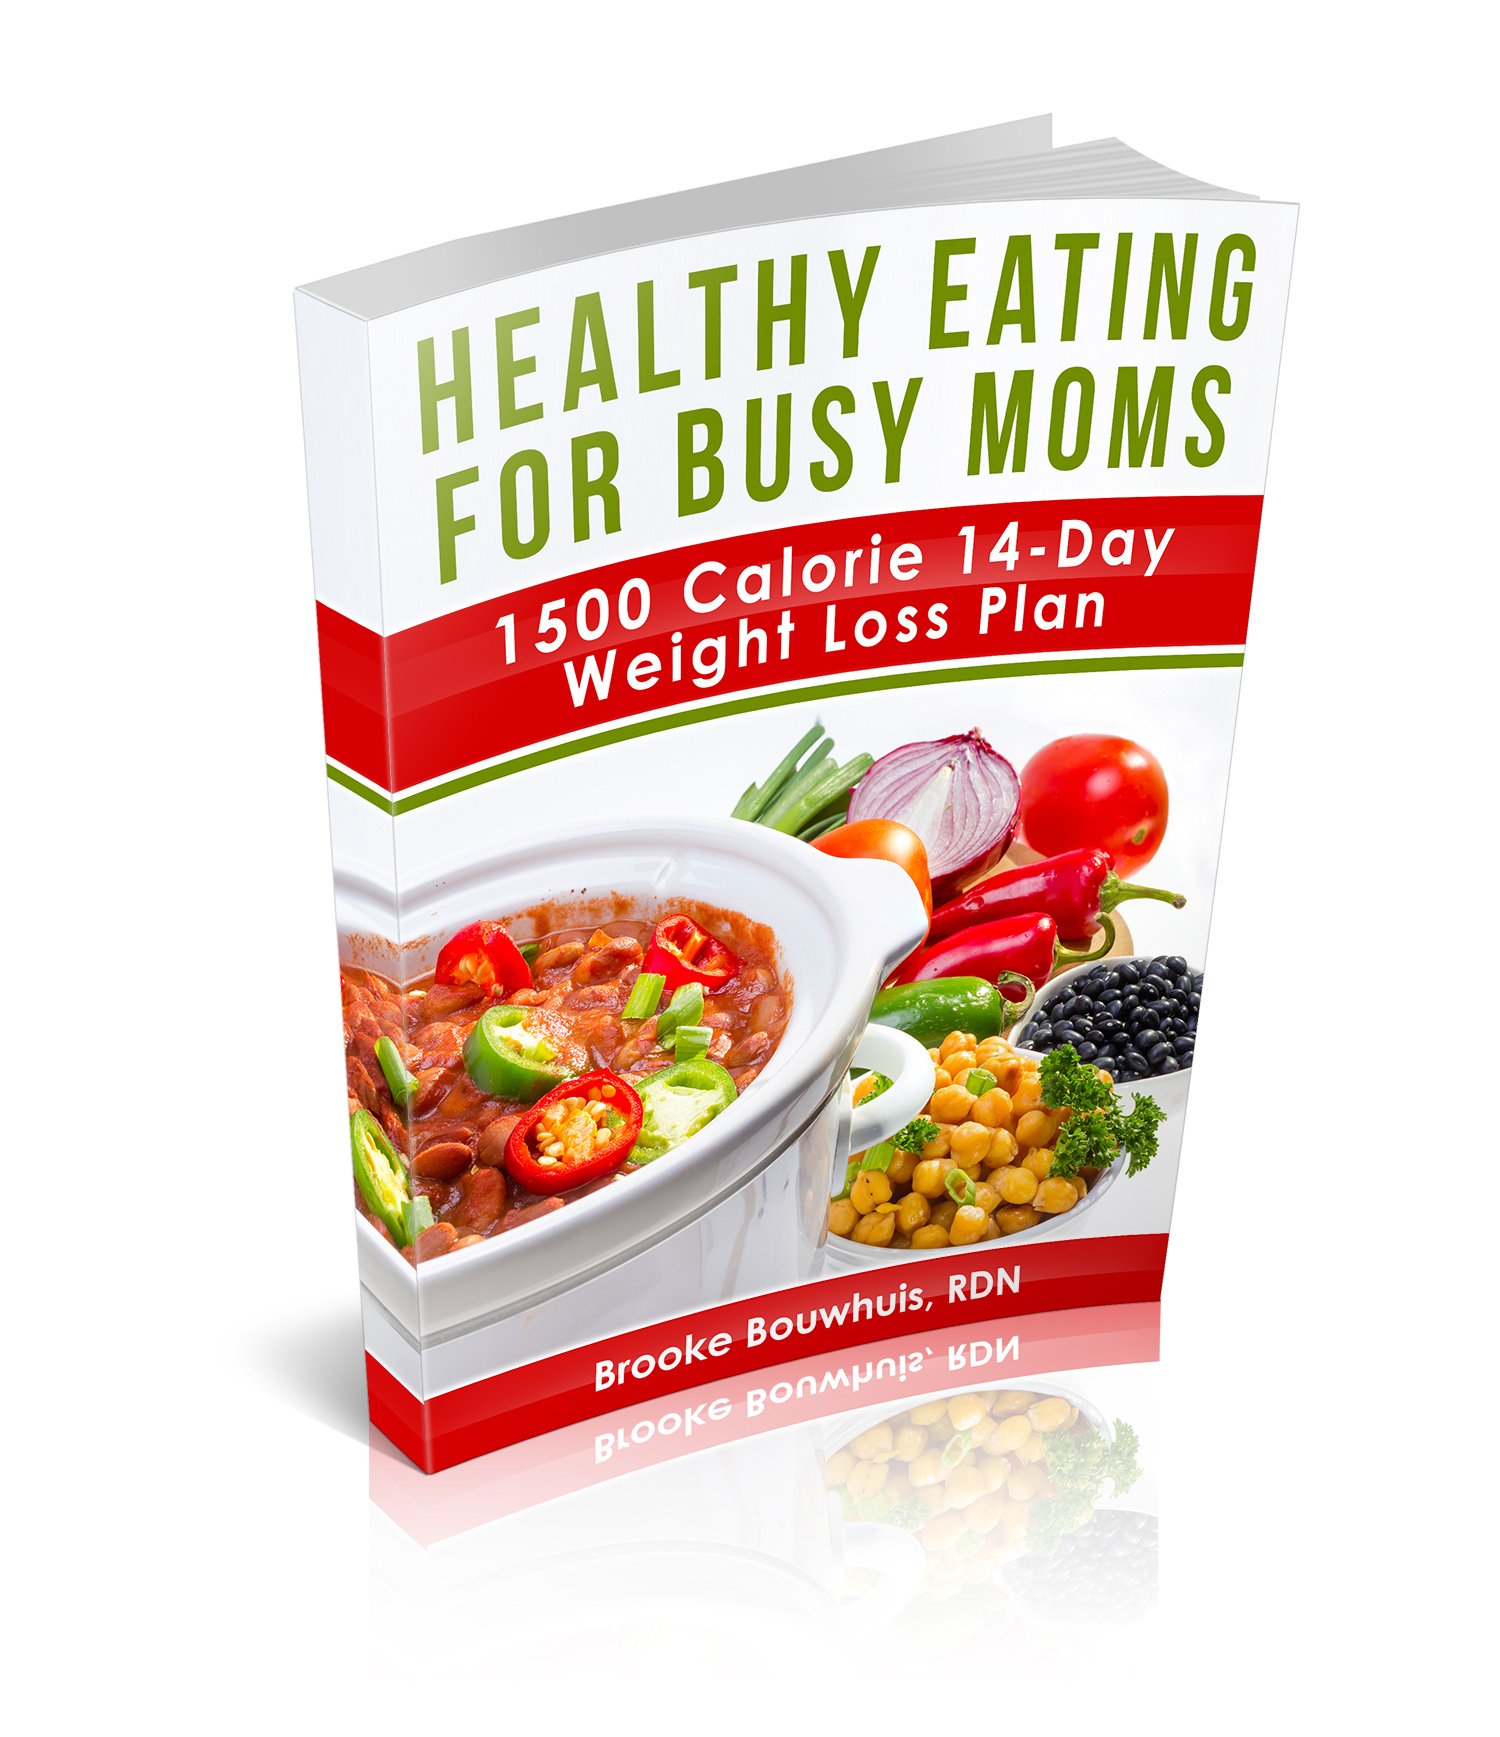 Busy Mom’s Healthy Eating Plan – 1500 Calorie 14-Day Weight Loss Plan